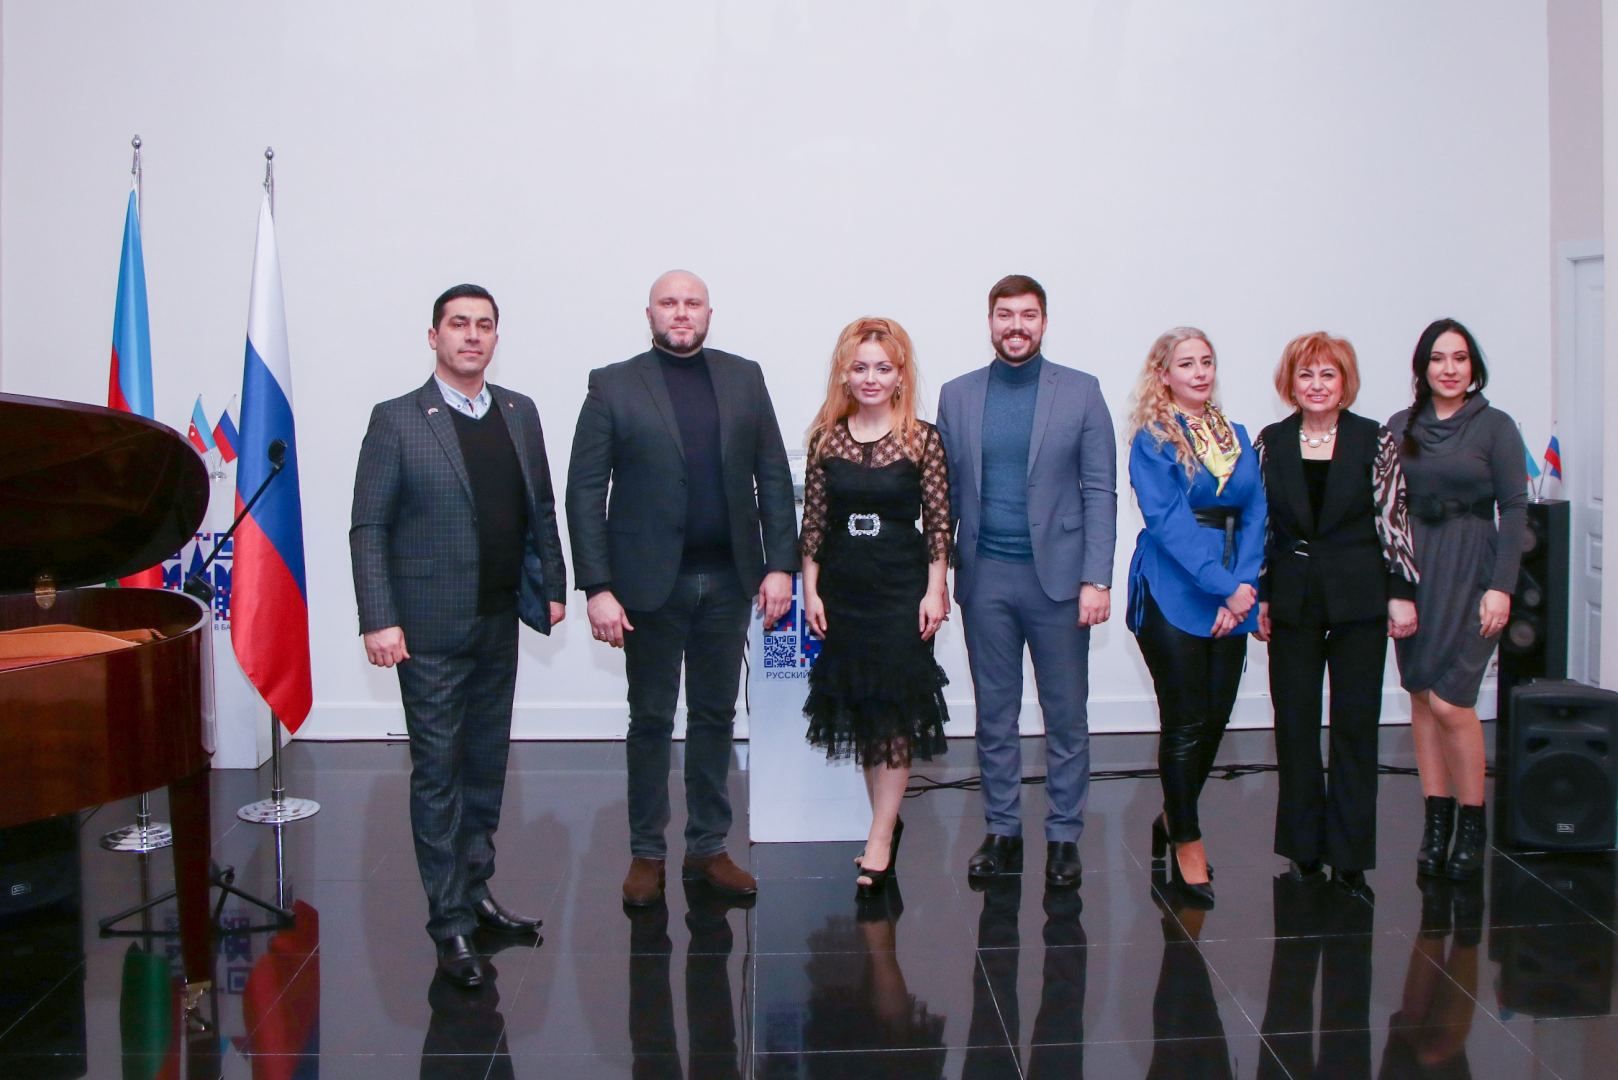 Russian House in Baku holds event dedicated to breaking of Siege of Leningrad [PHOTO]